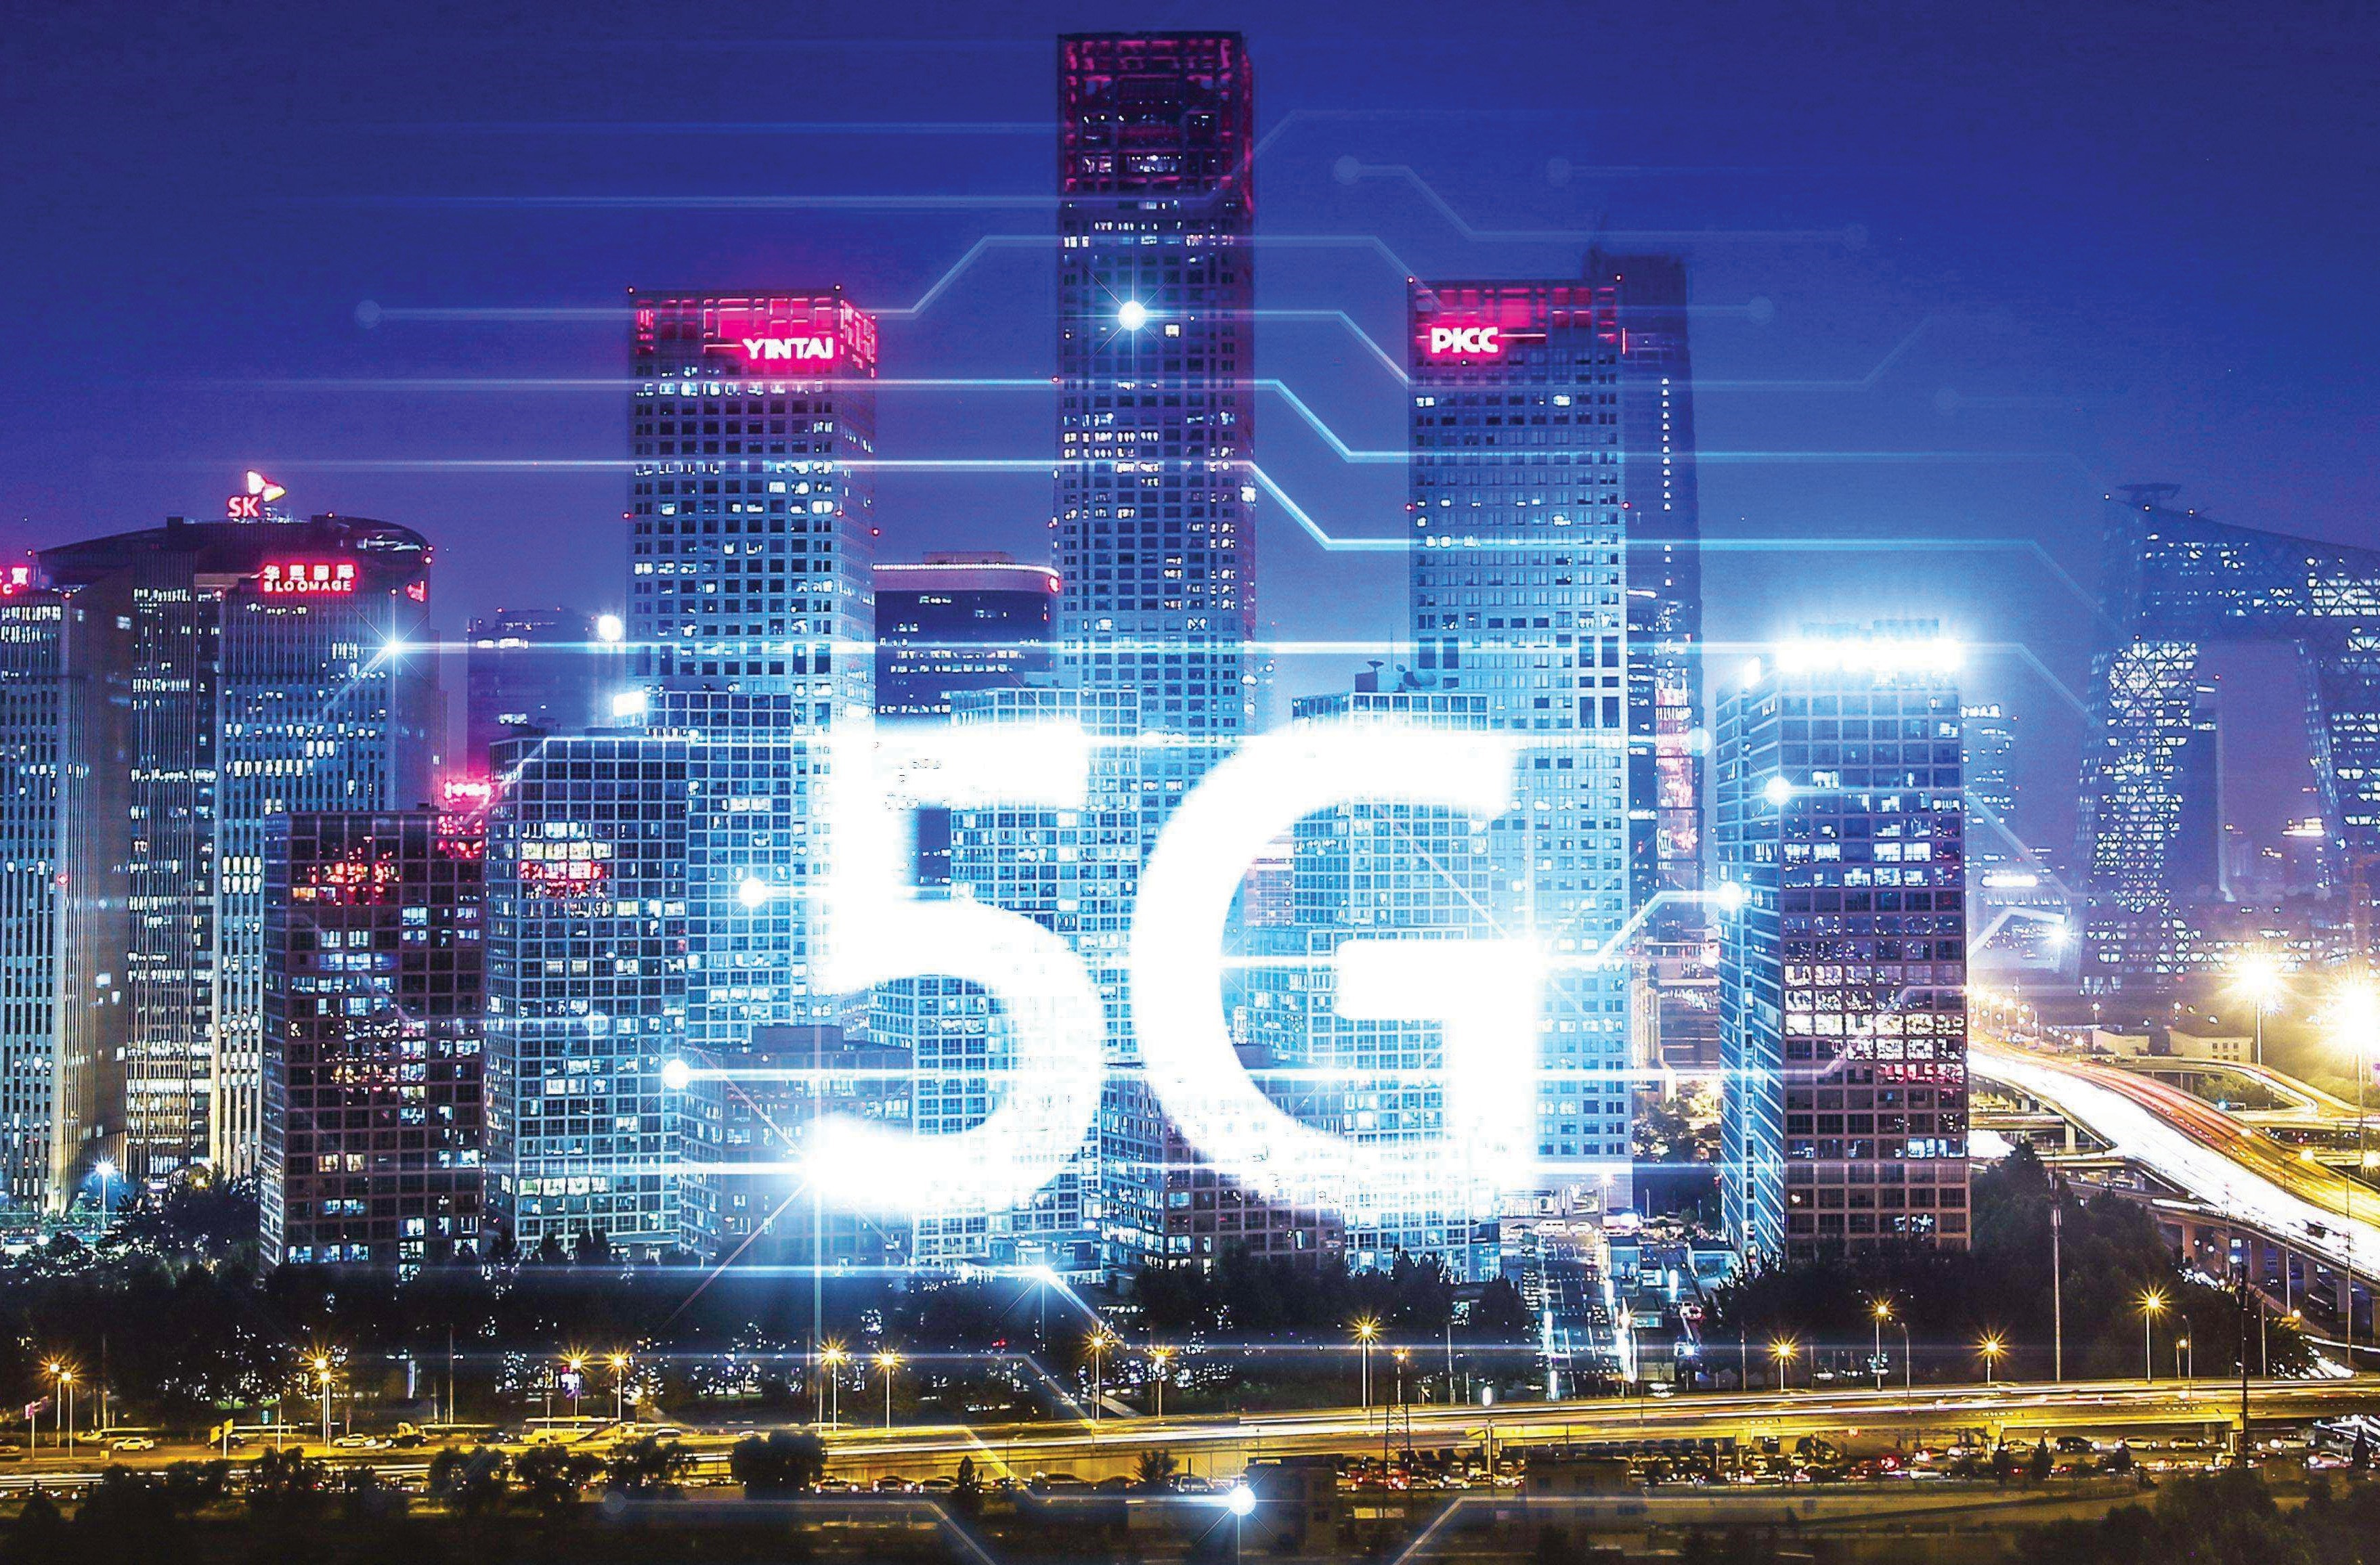 Softfoundry announce the world's first all virtual 5G mobile core system